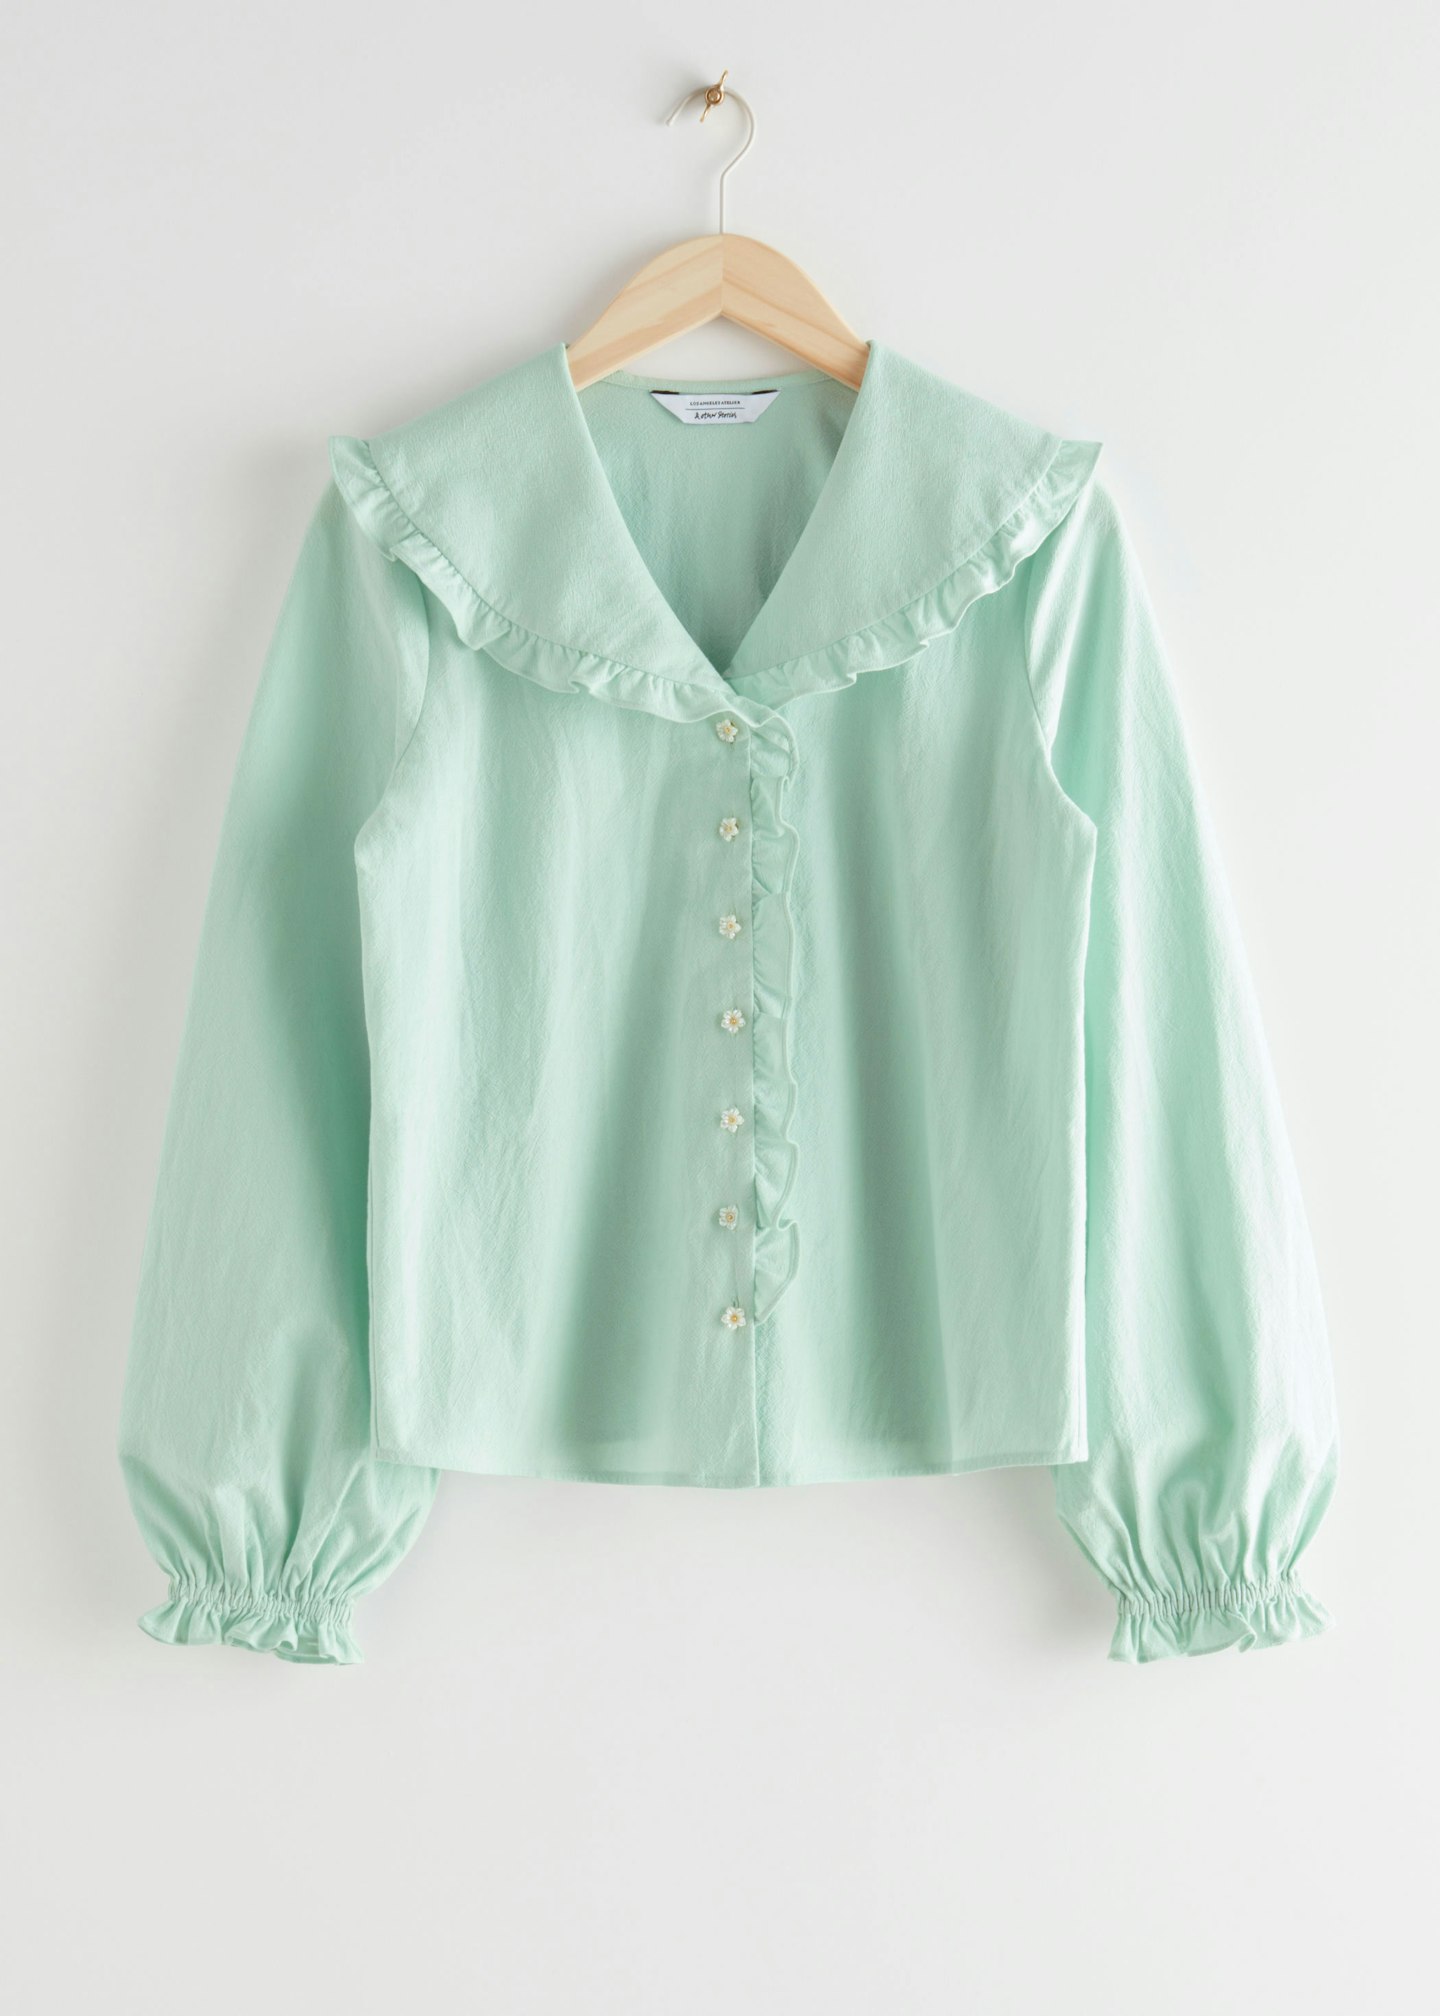 & Other Stories, Boxy Button-Up Blouse, £55